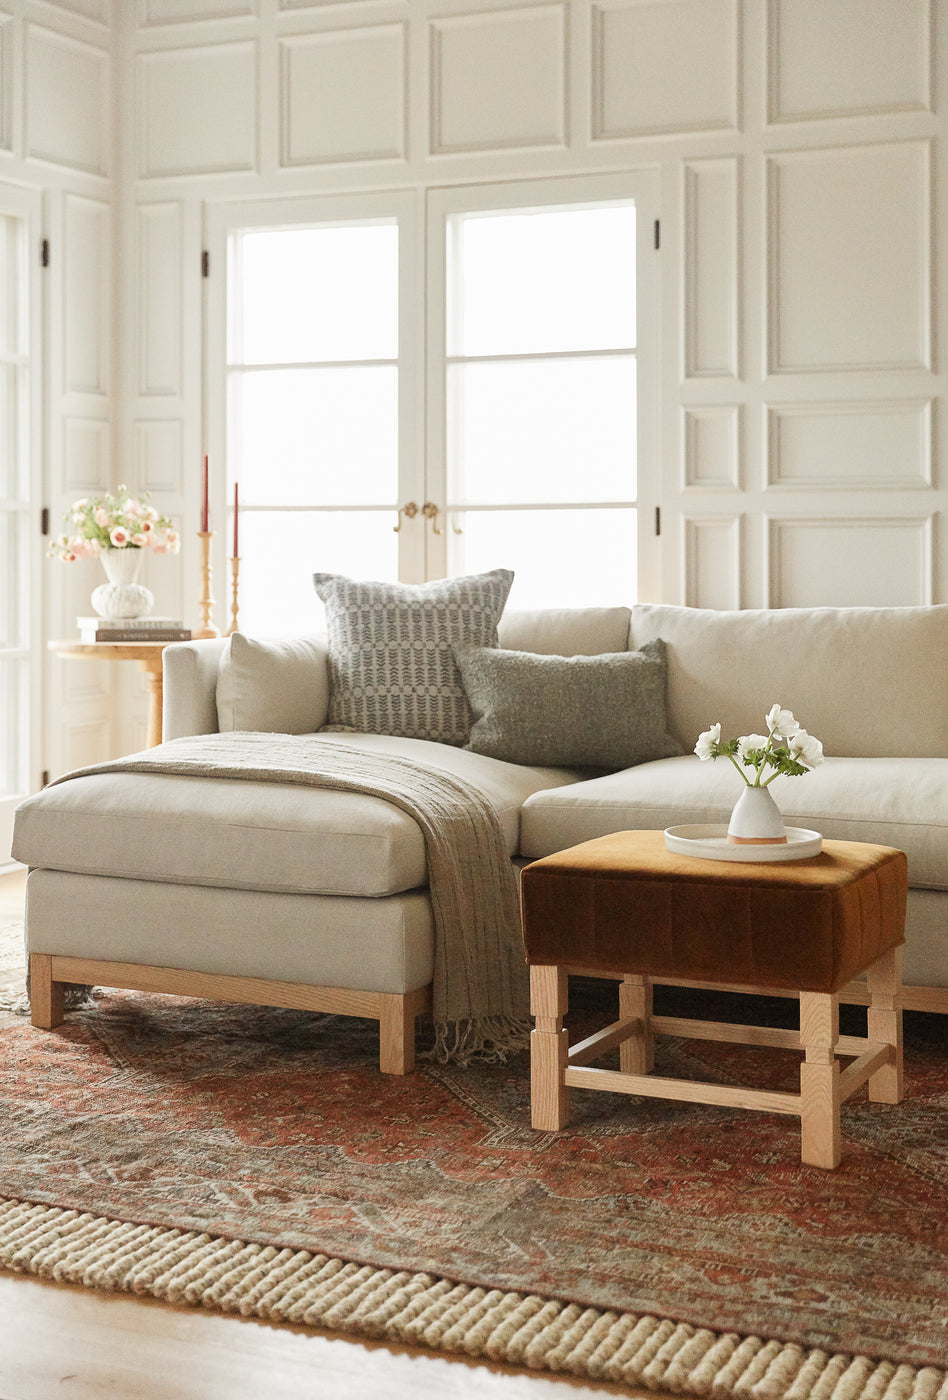 How To Style a Living Room With Decorative Pillows